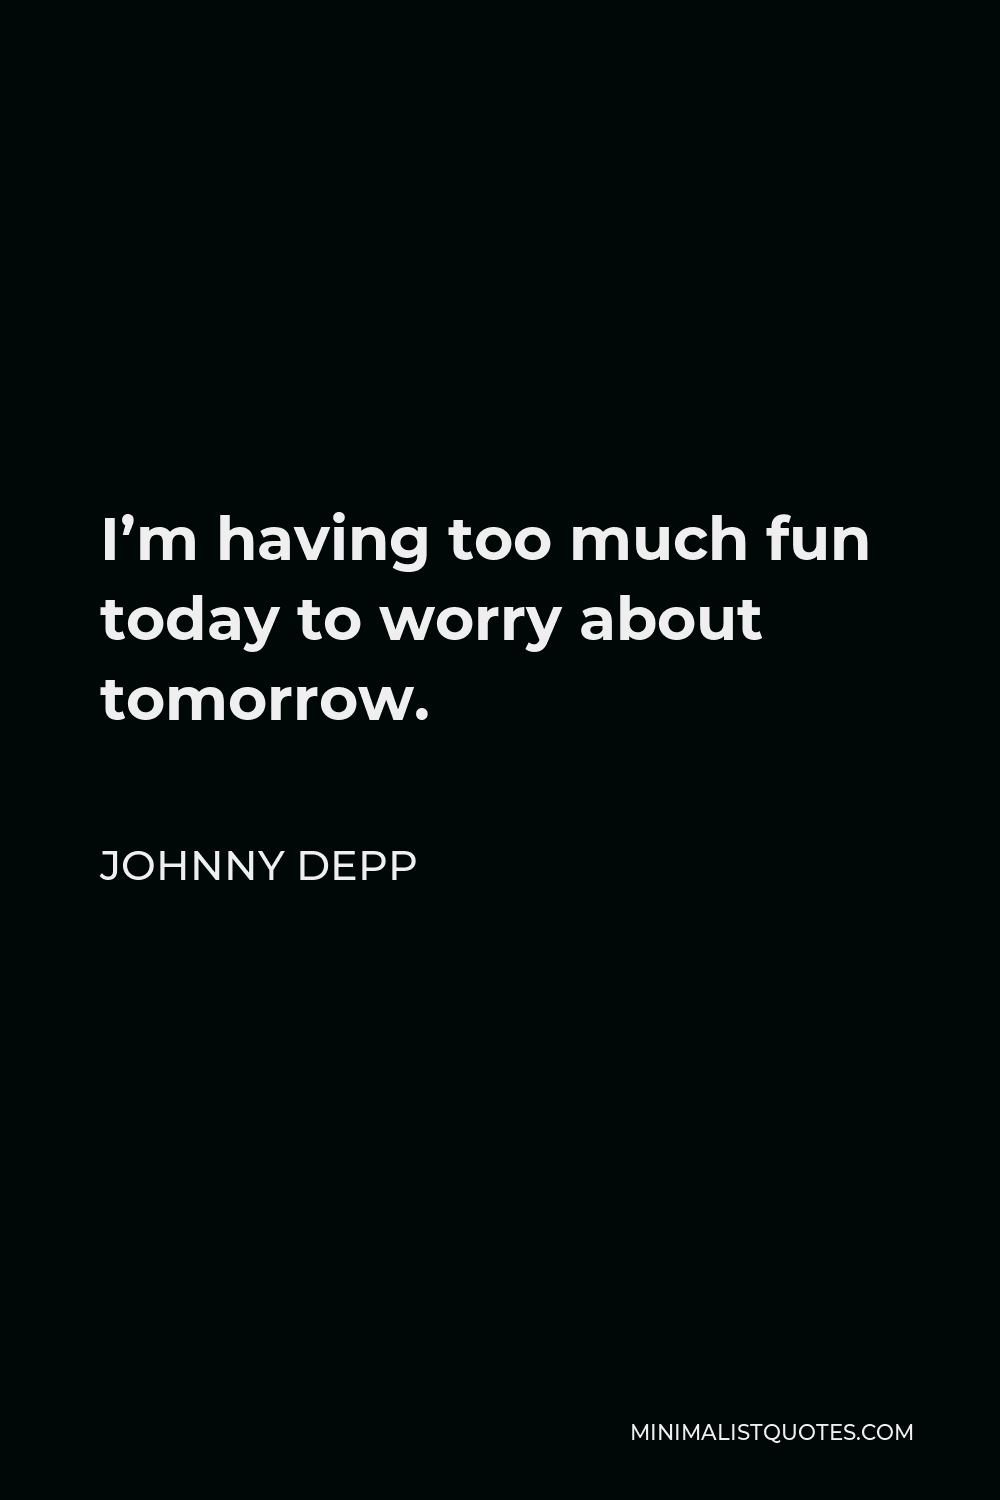 Johnny Depp Quote: I'm having too much fun today to worry about tomorrow.